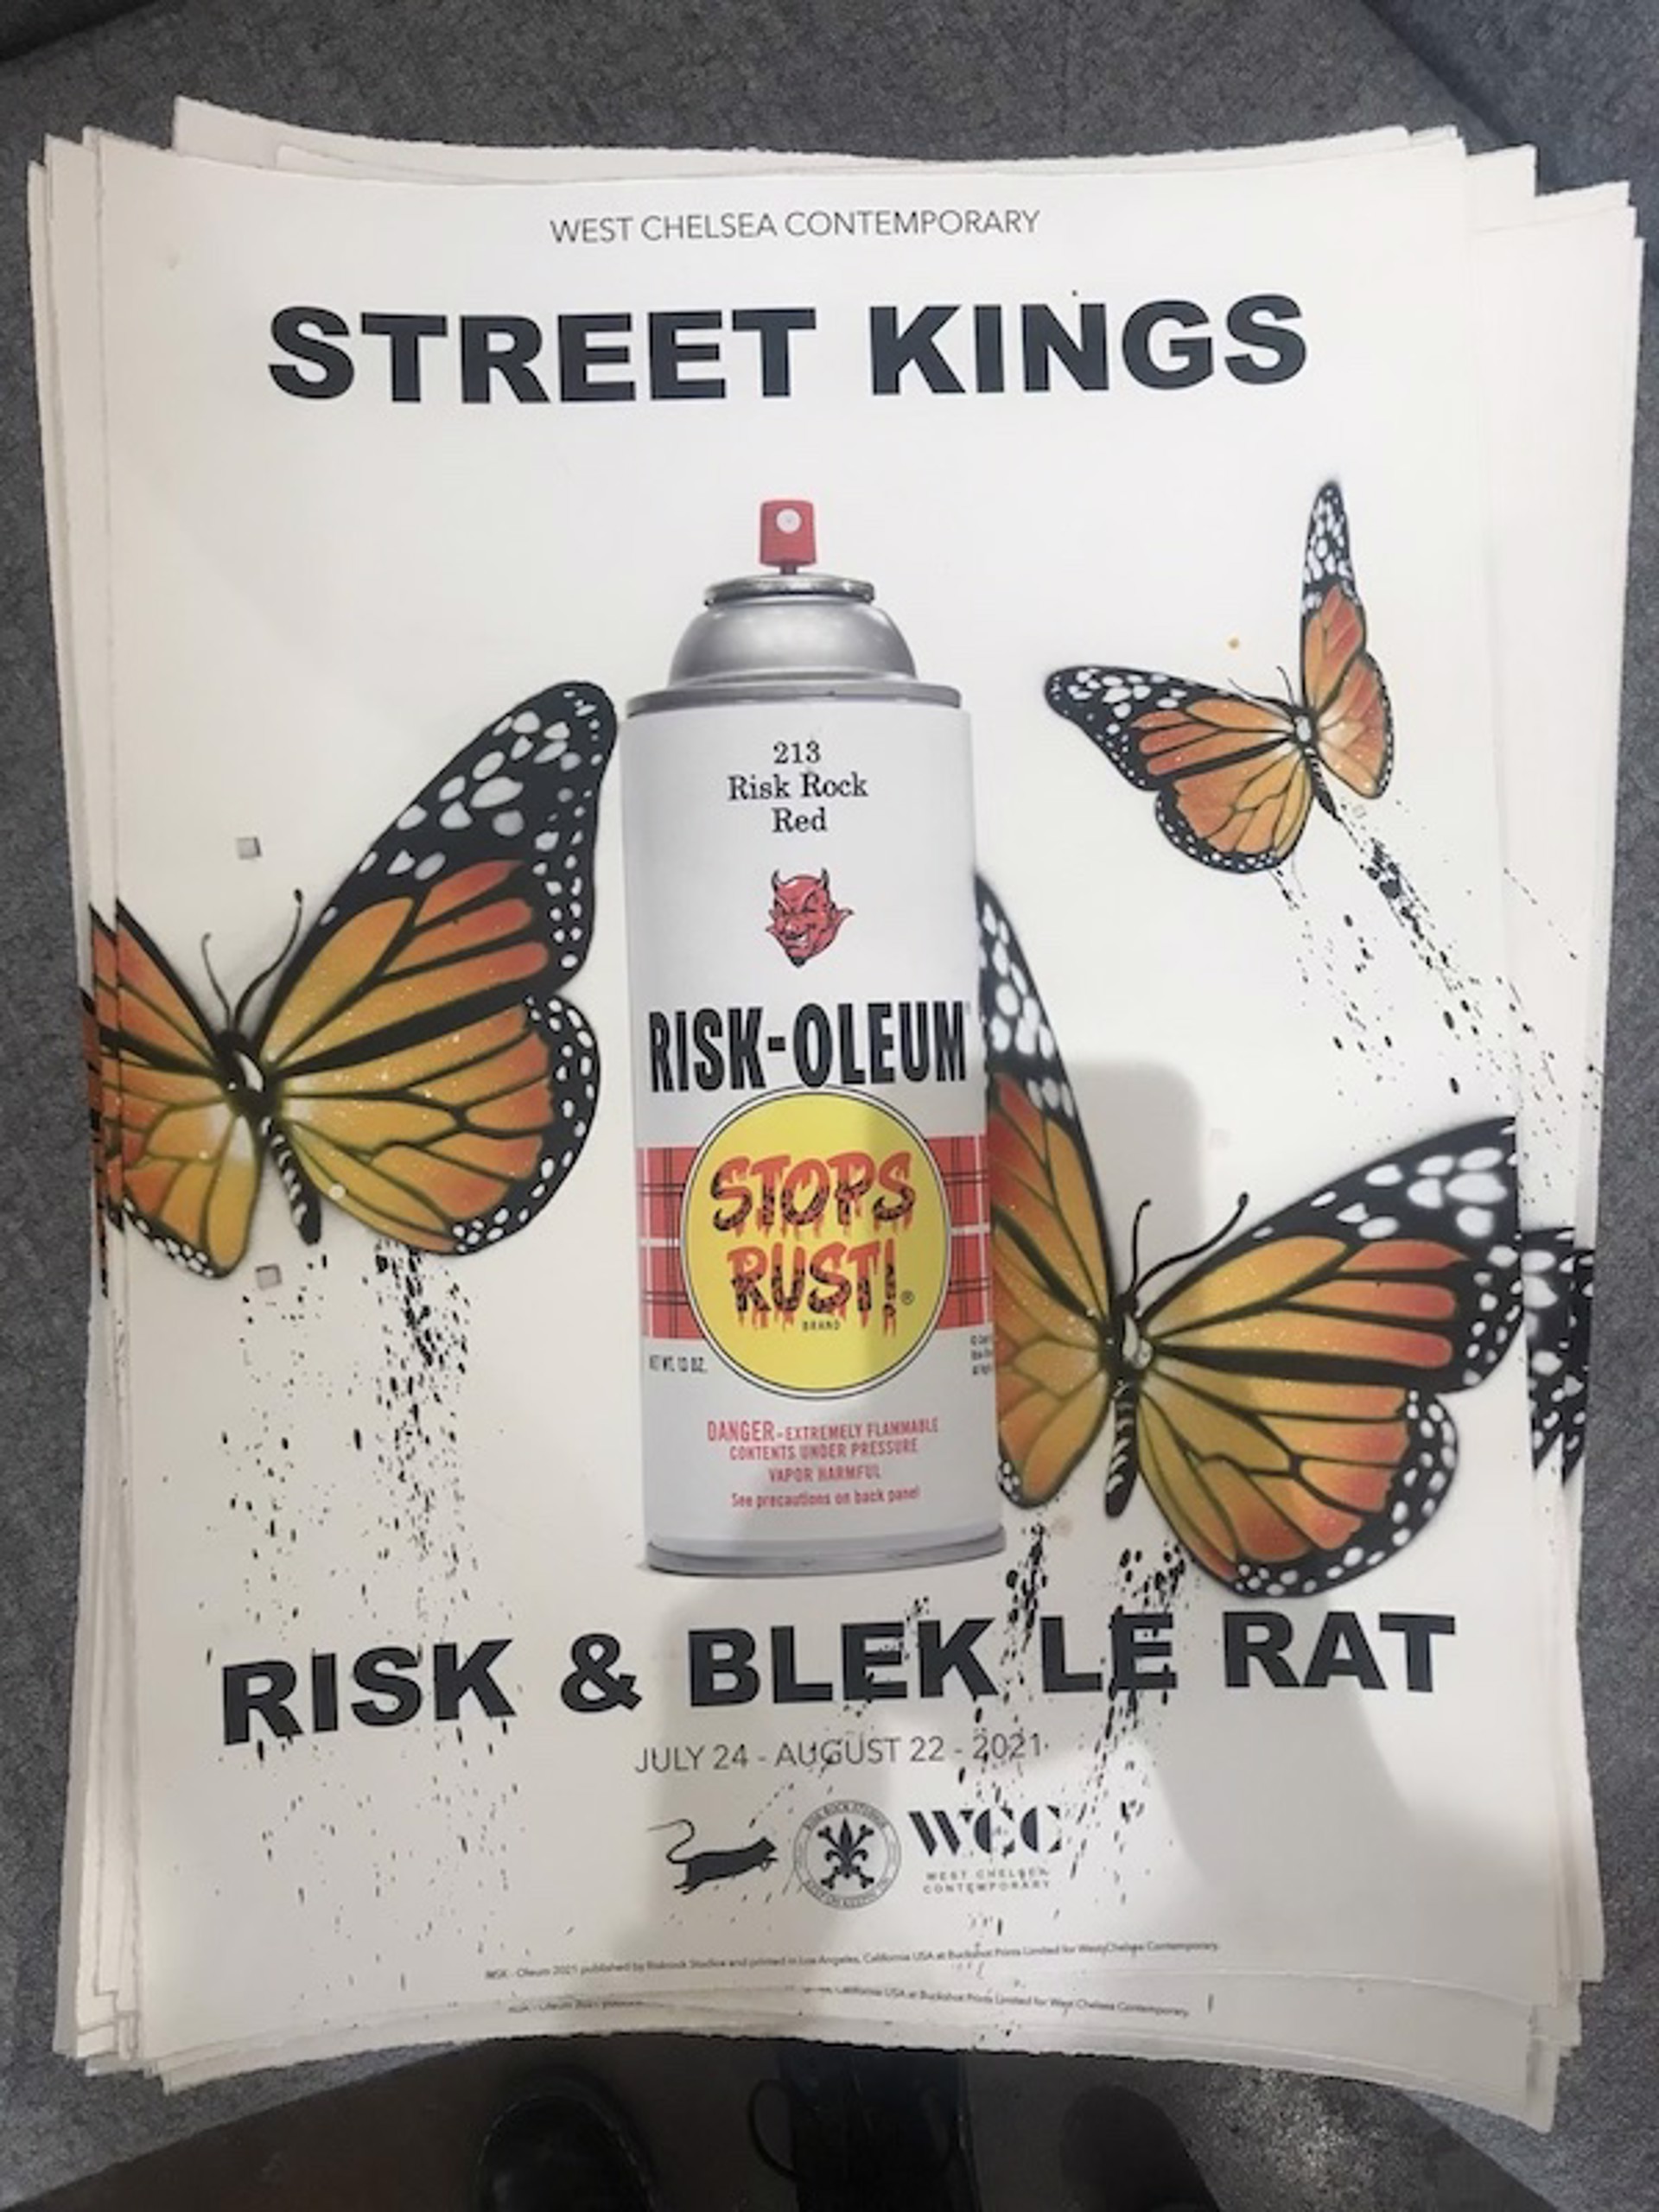 Street Kings Show Print (38/50) by Risk